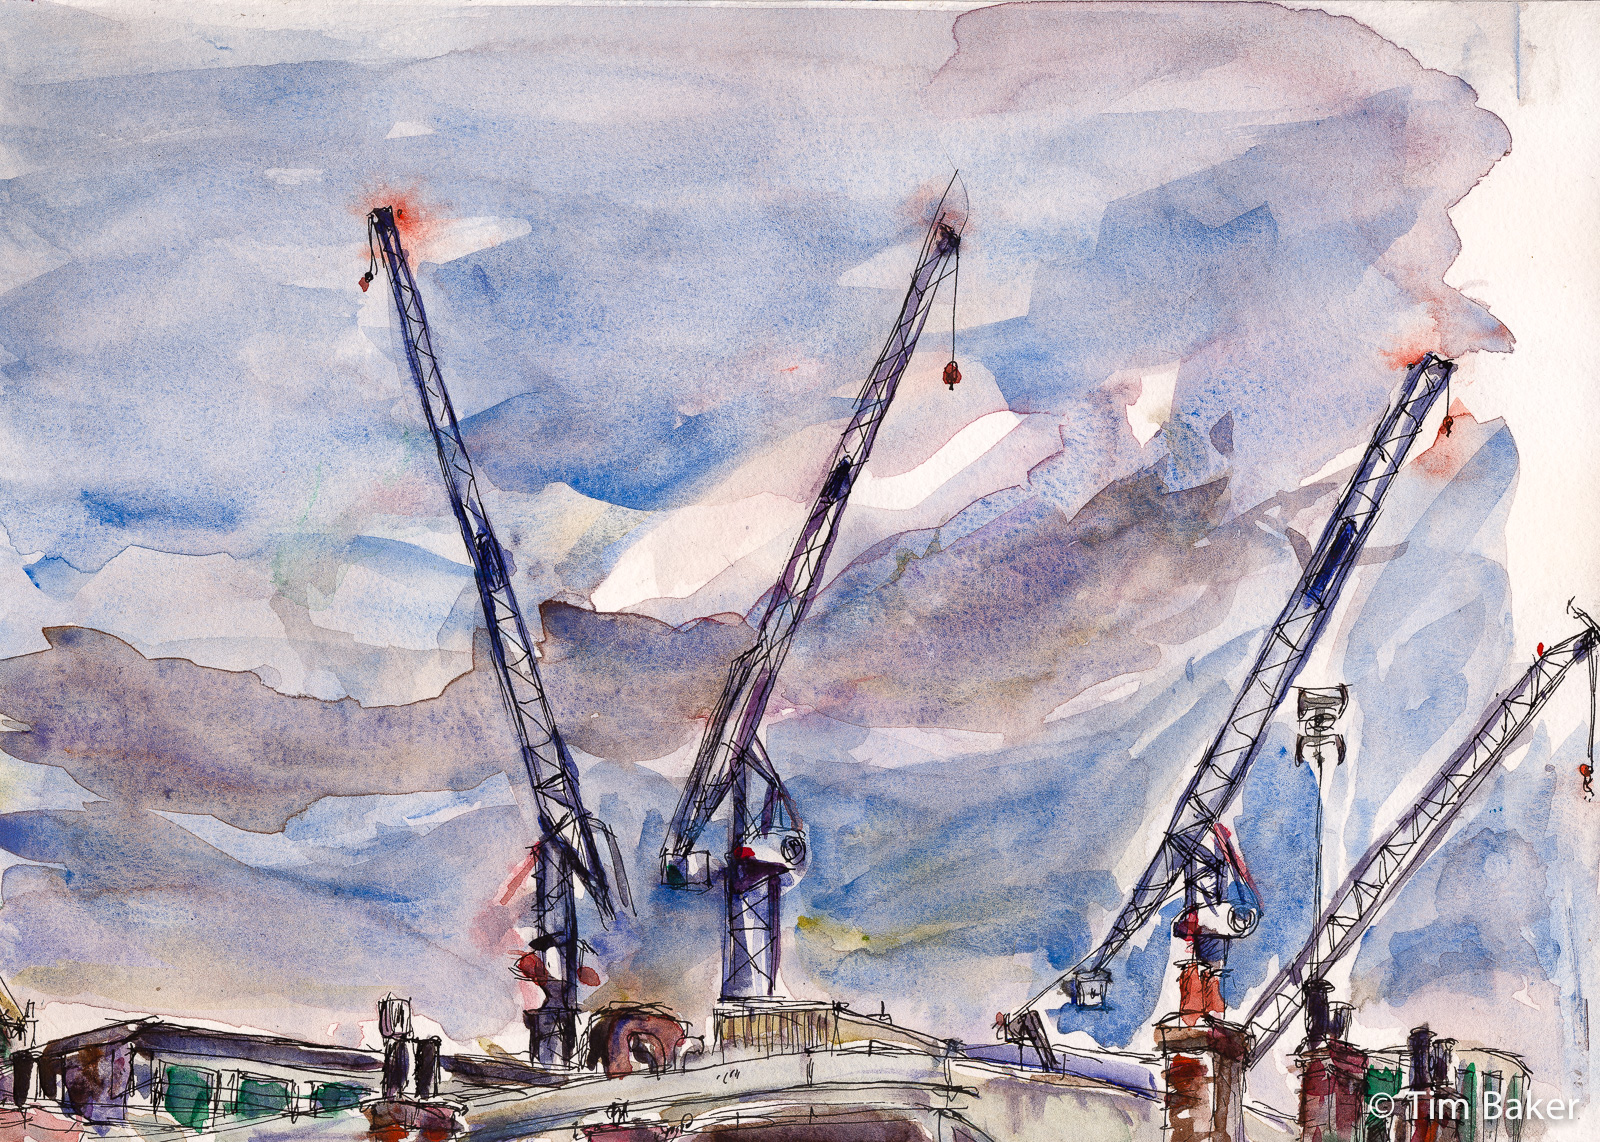 Kingston Cranes, by the Ram Pub (Page 2), Technical Pen and Watercolour, A4 Dalter Rowney Graduate Mixed Media Pad.